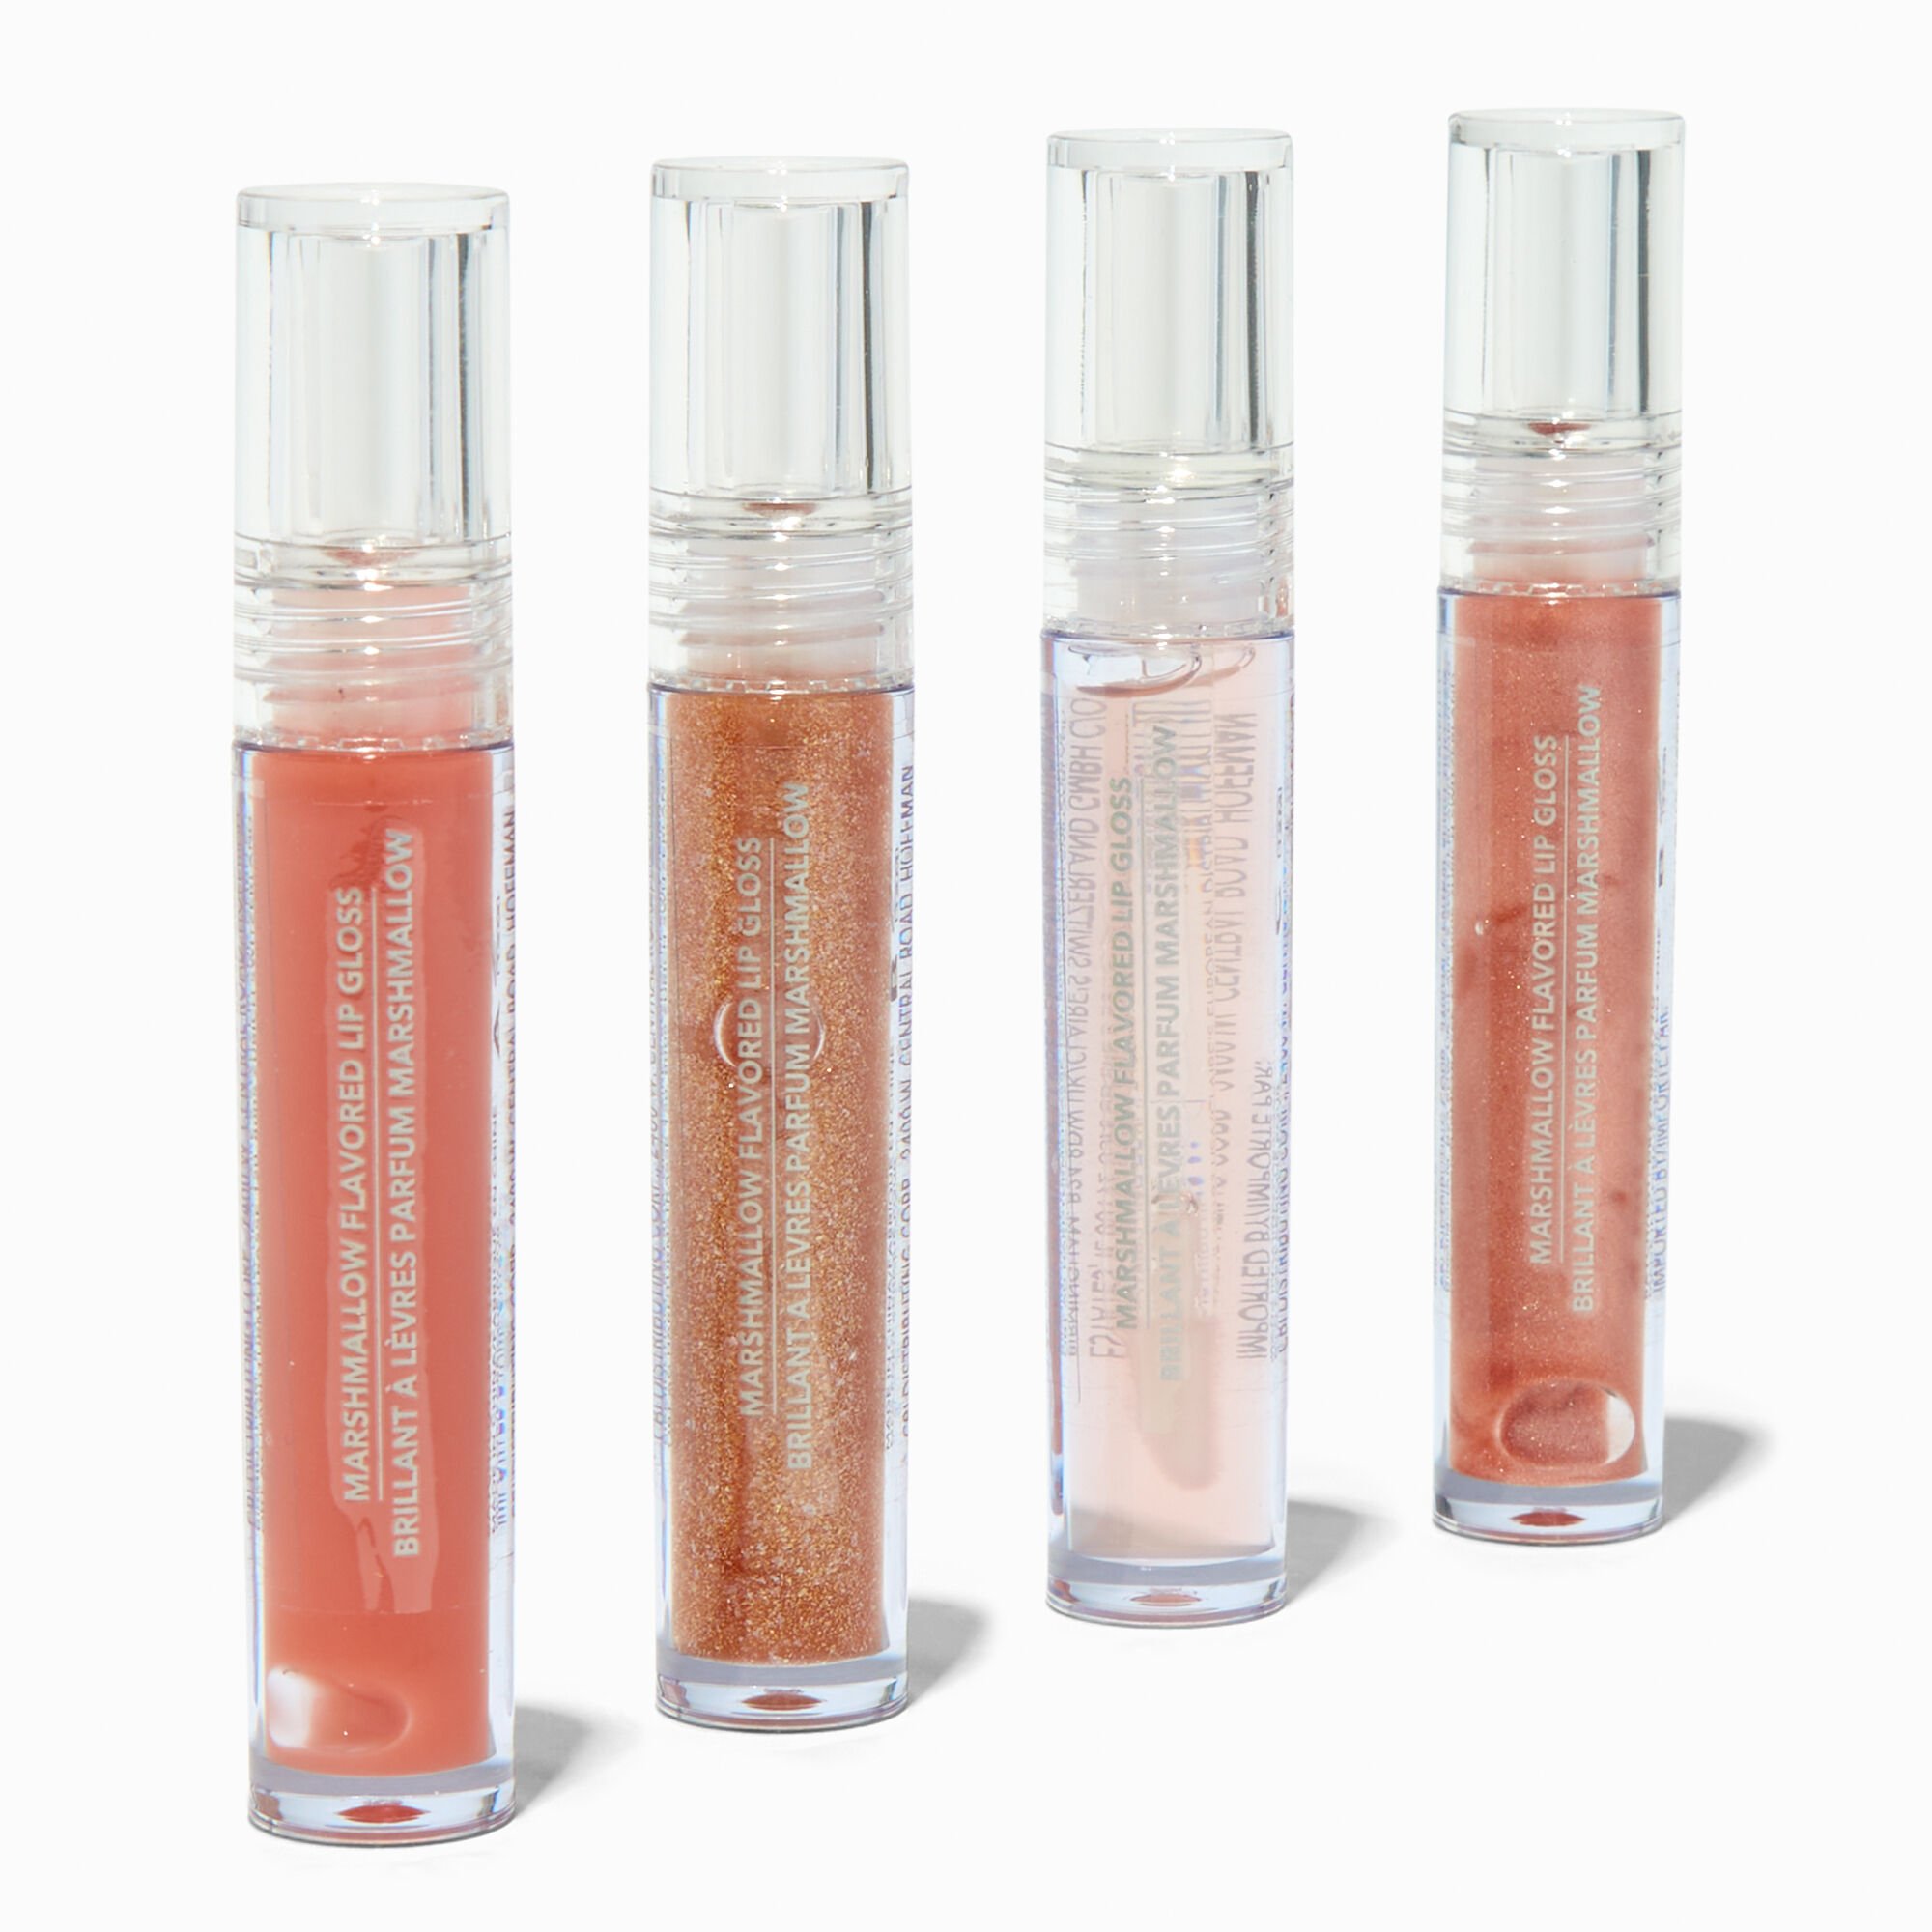 View Claires Bronzed Nude Shimmer Lip Gloss Set 4 Pack Red information